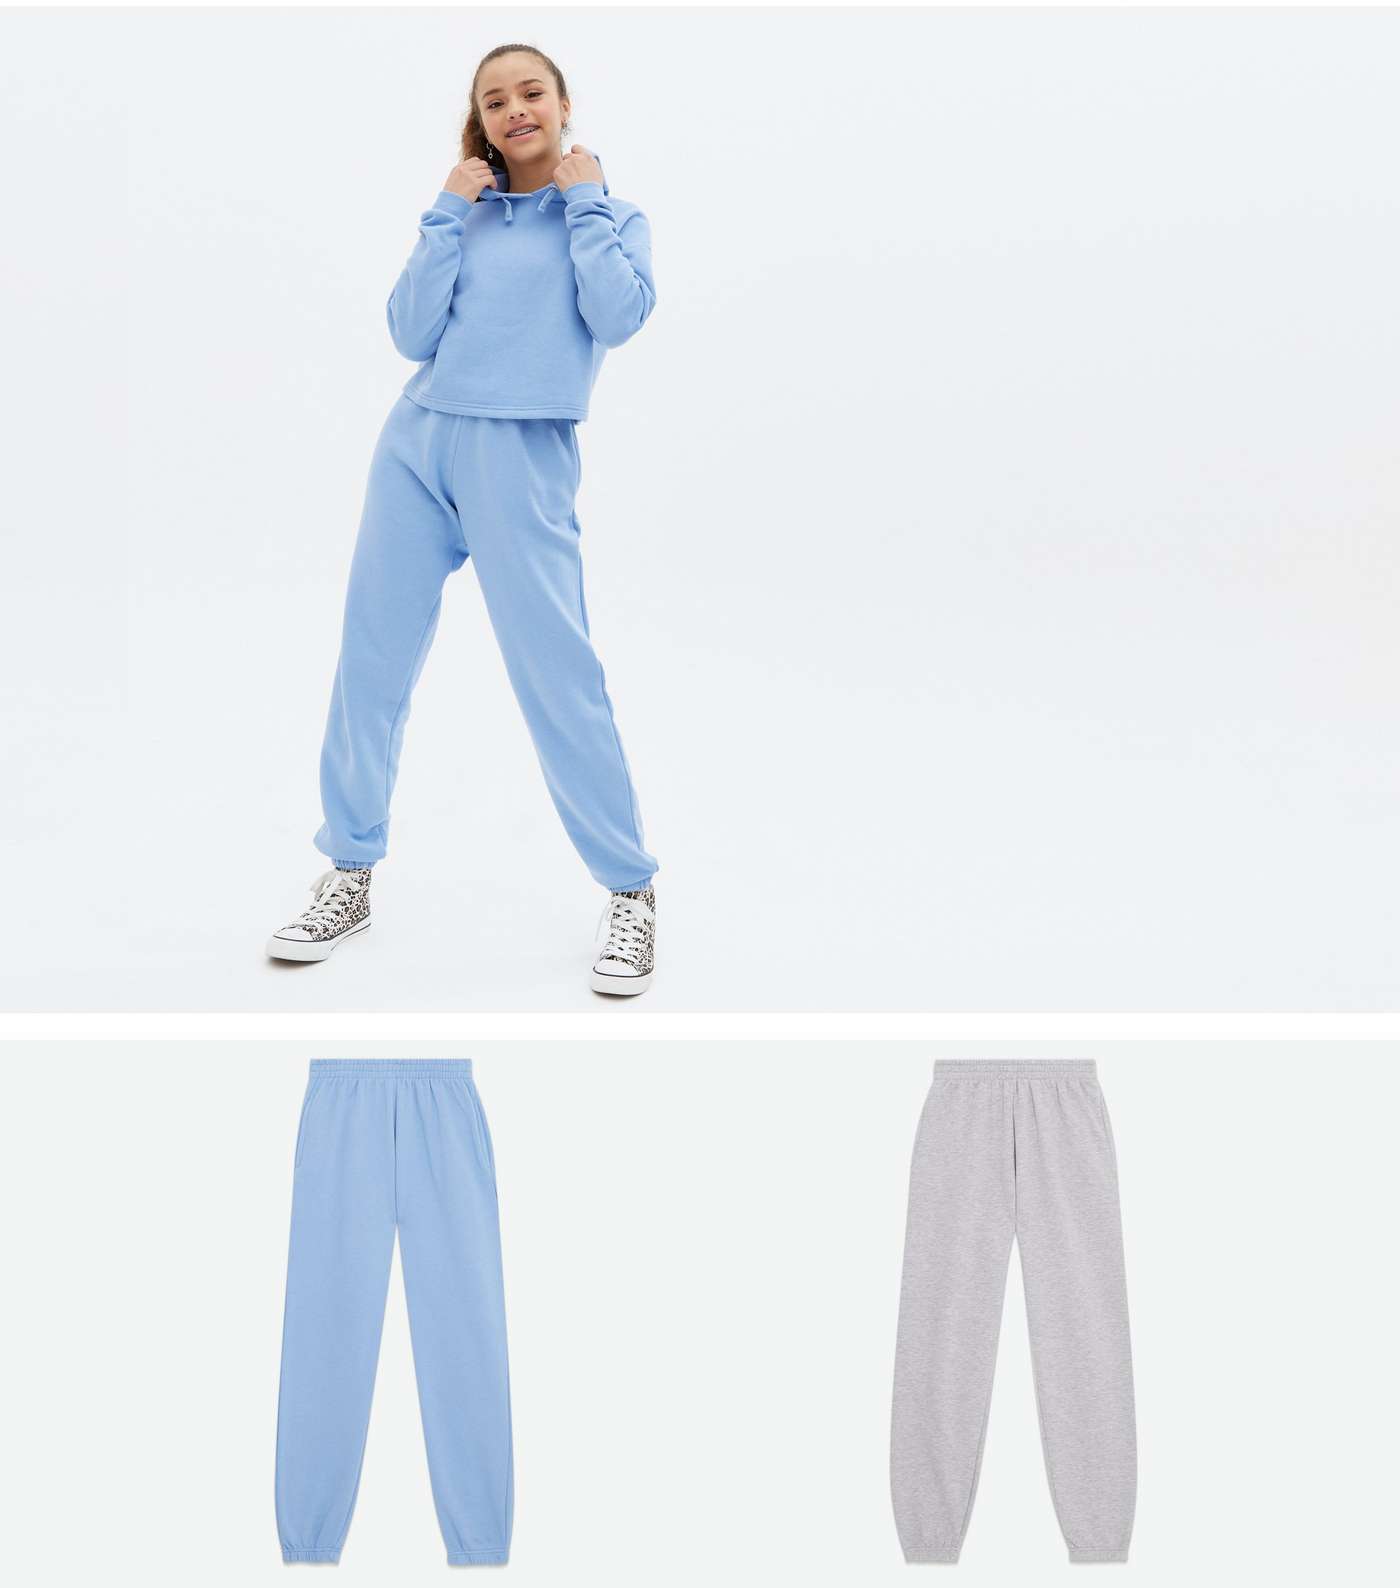 Girls 2 Pack Pale Blue and Grey Cuffed Joggers